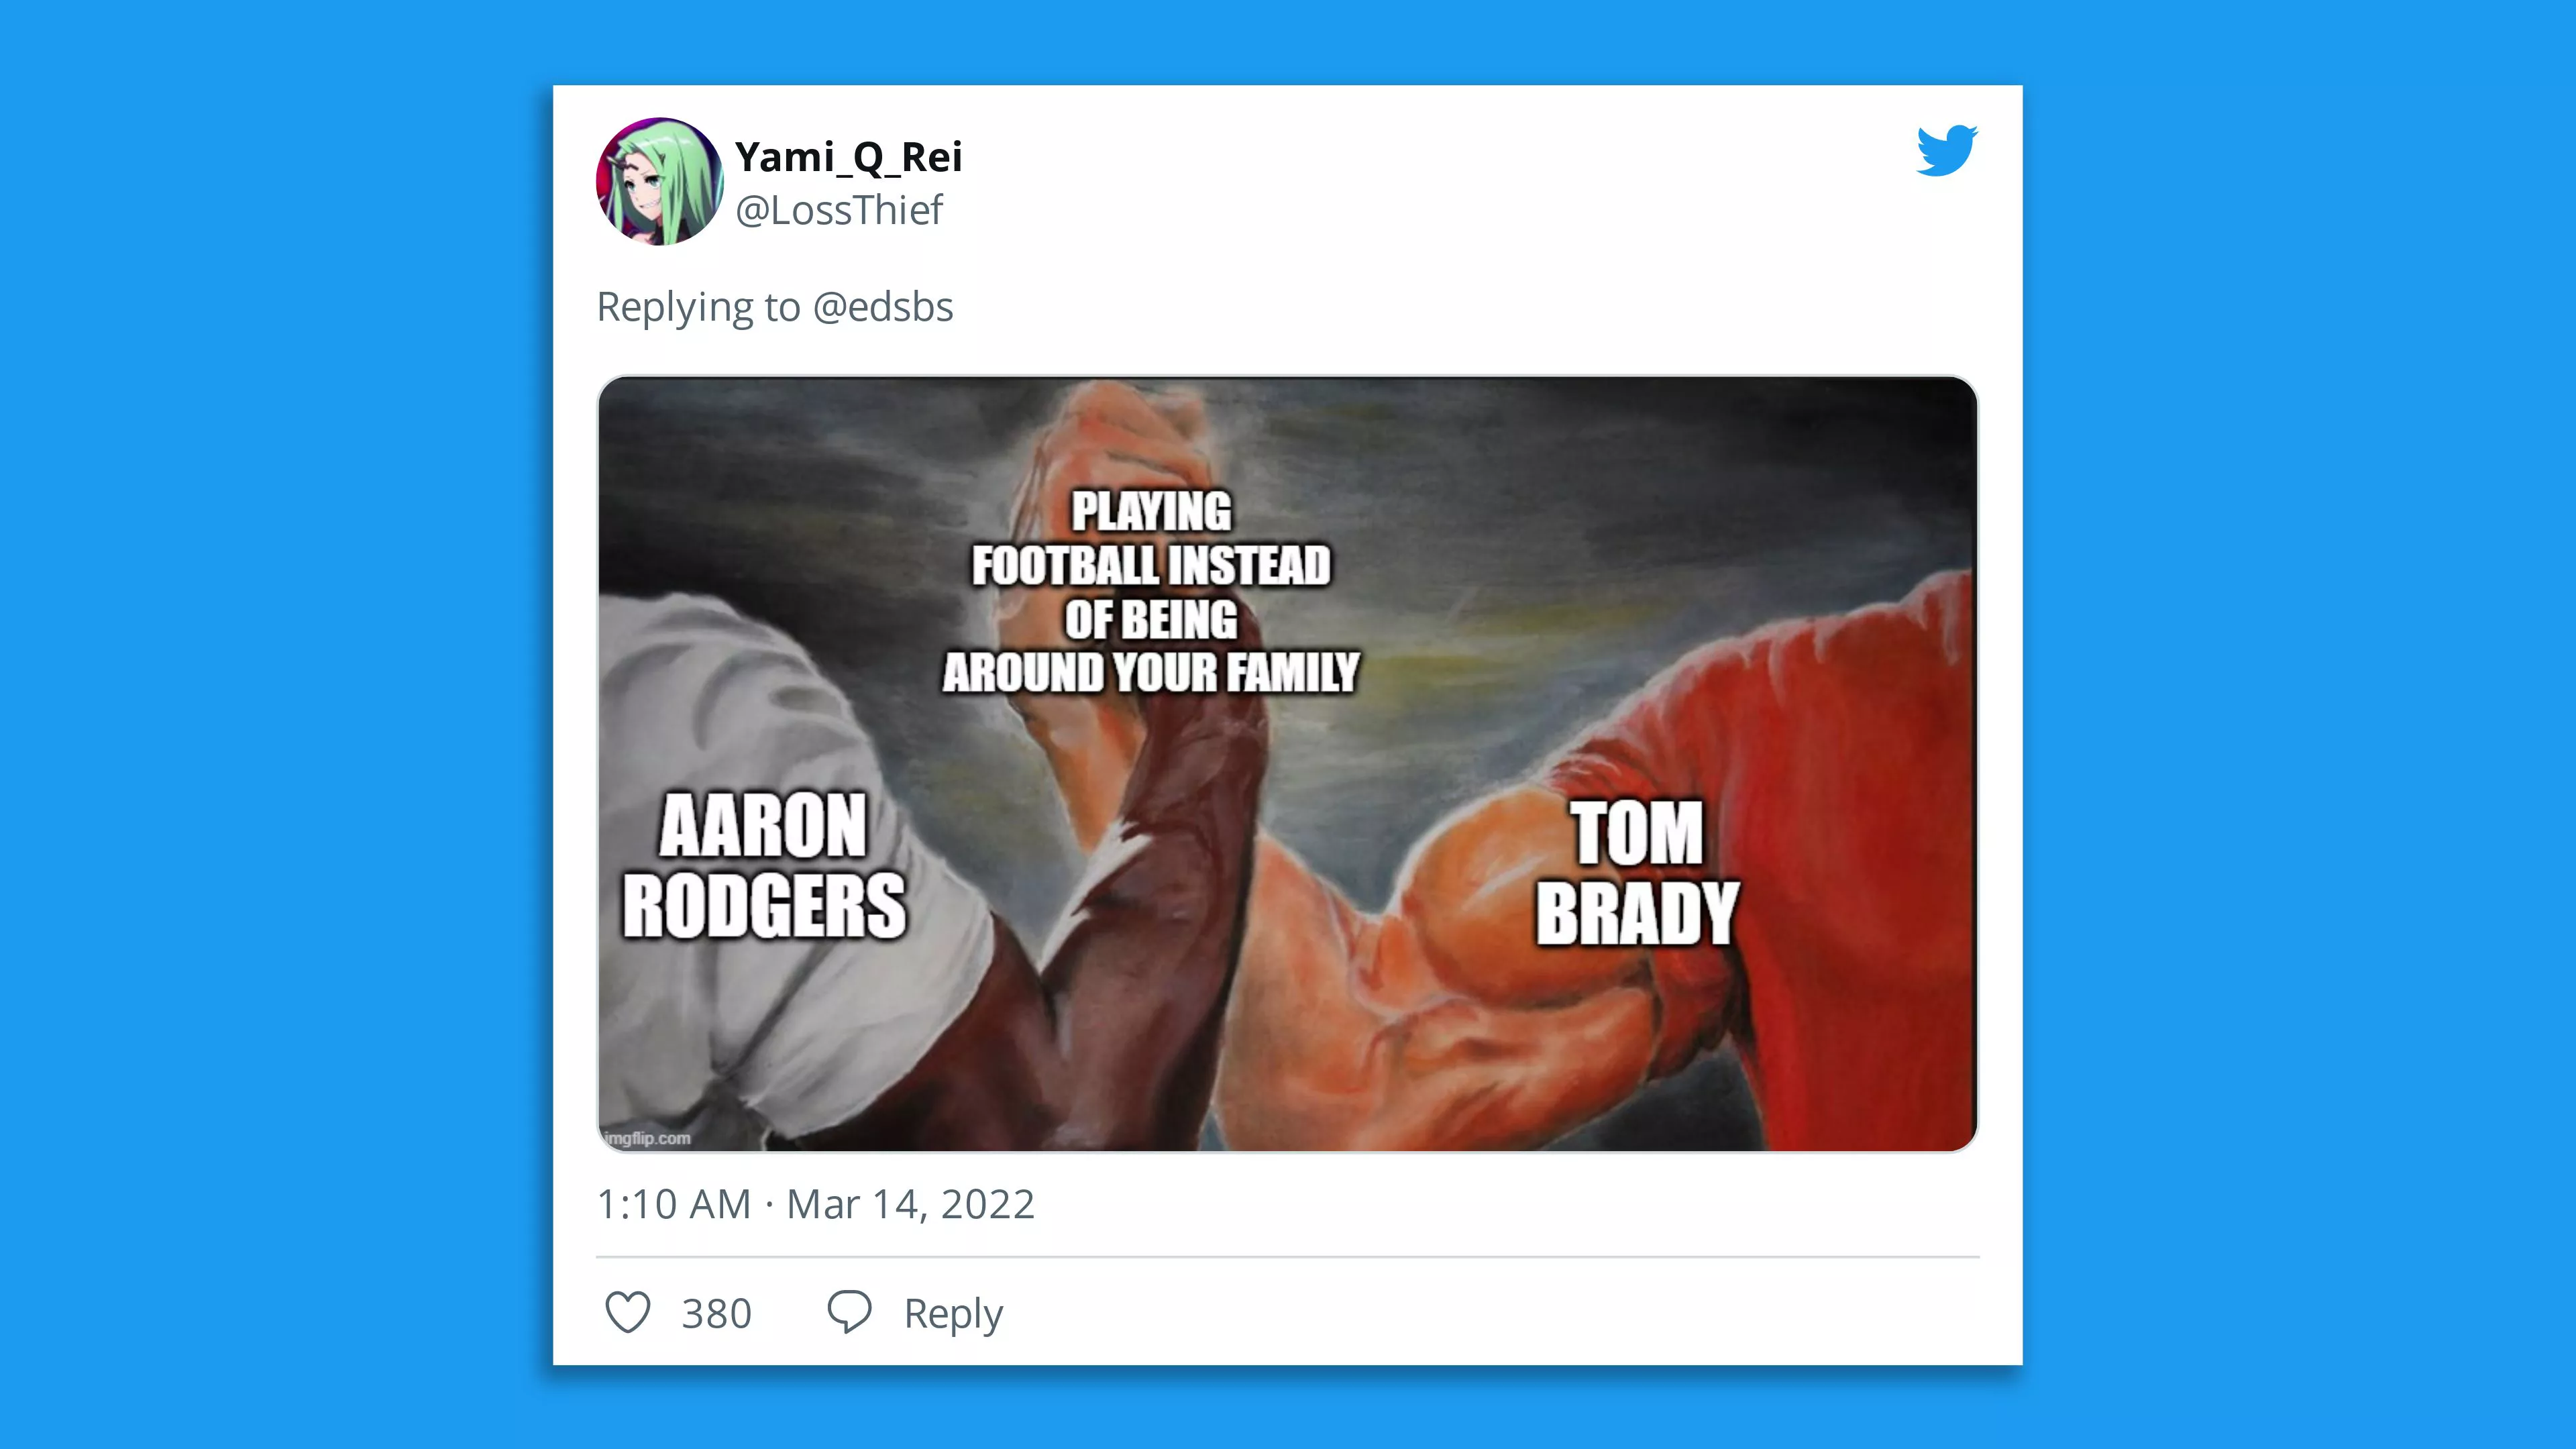 A screenshot of a tweet with a meme about Tom Brady and Aaron Rodgers